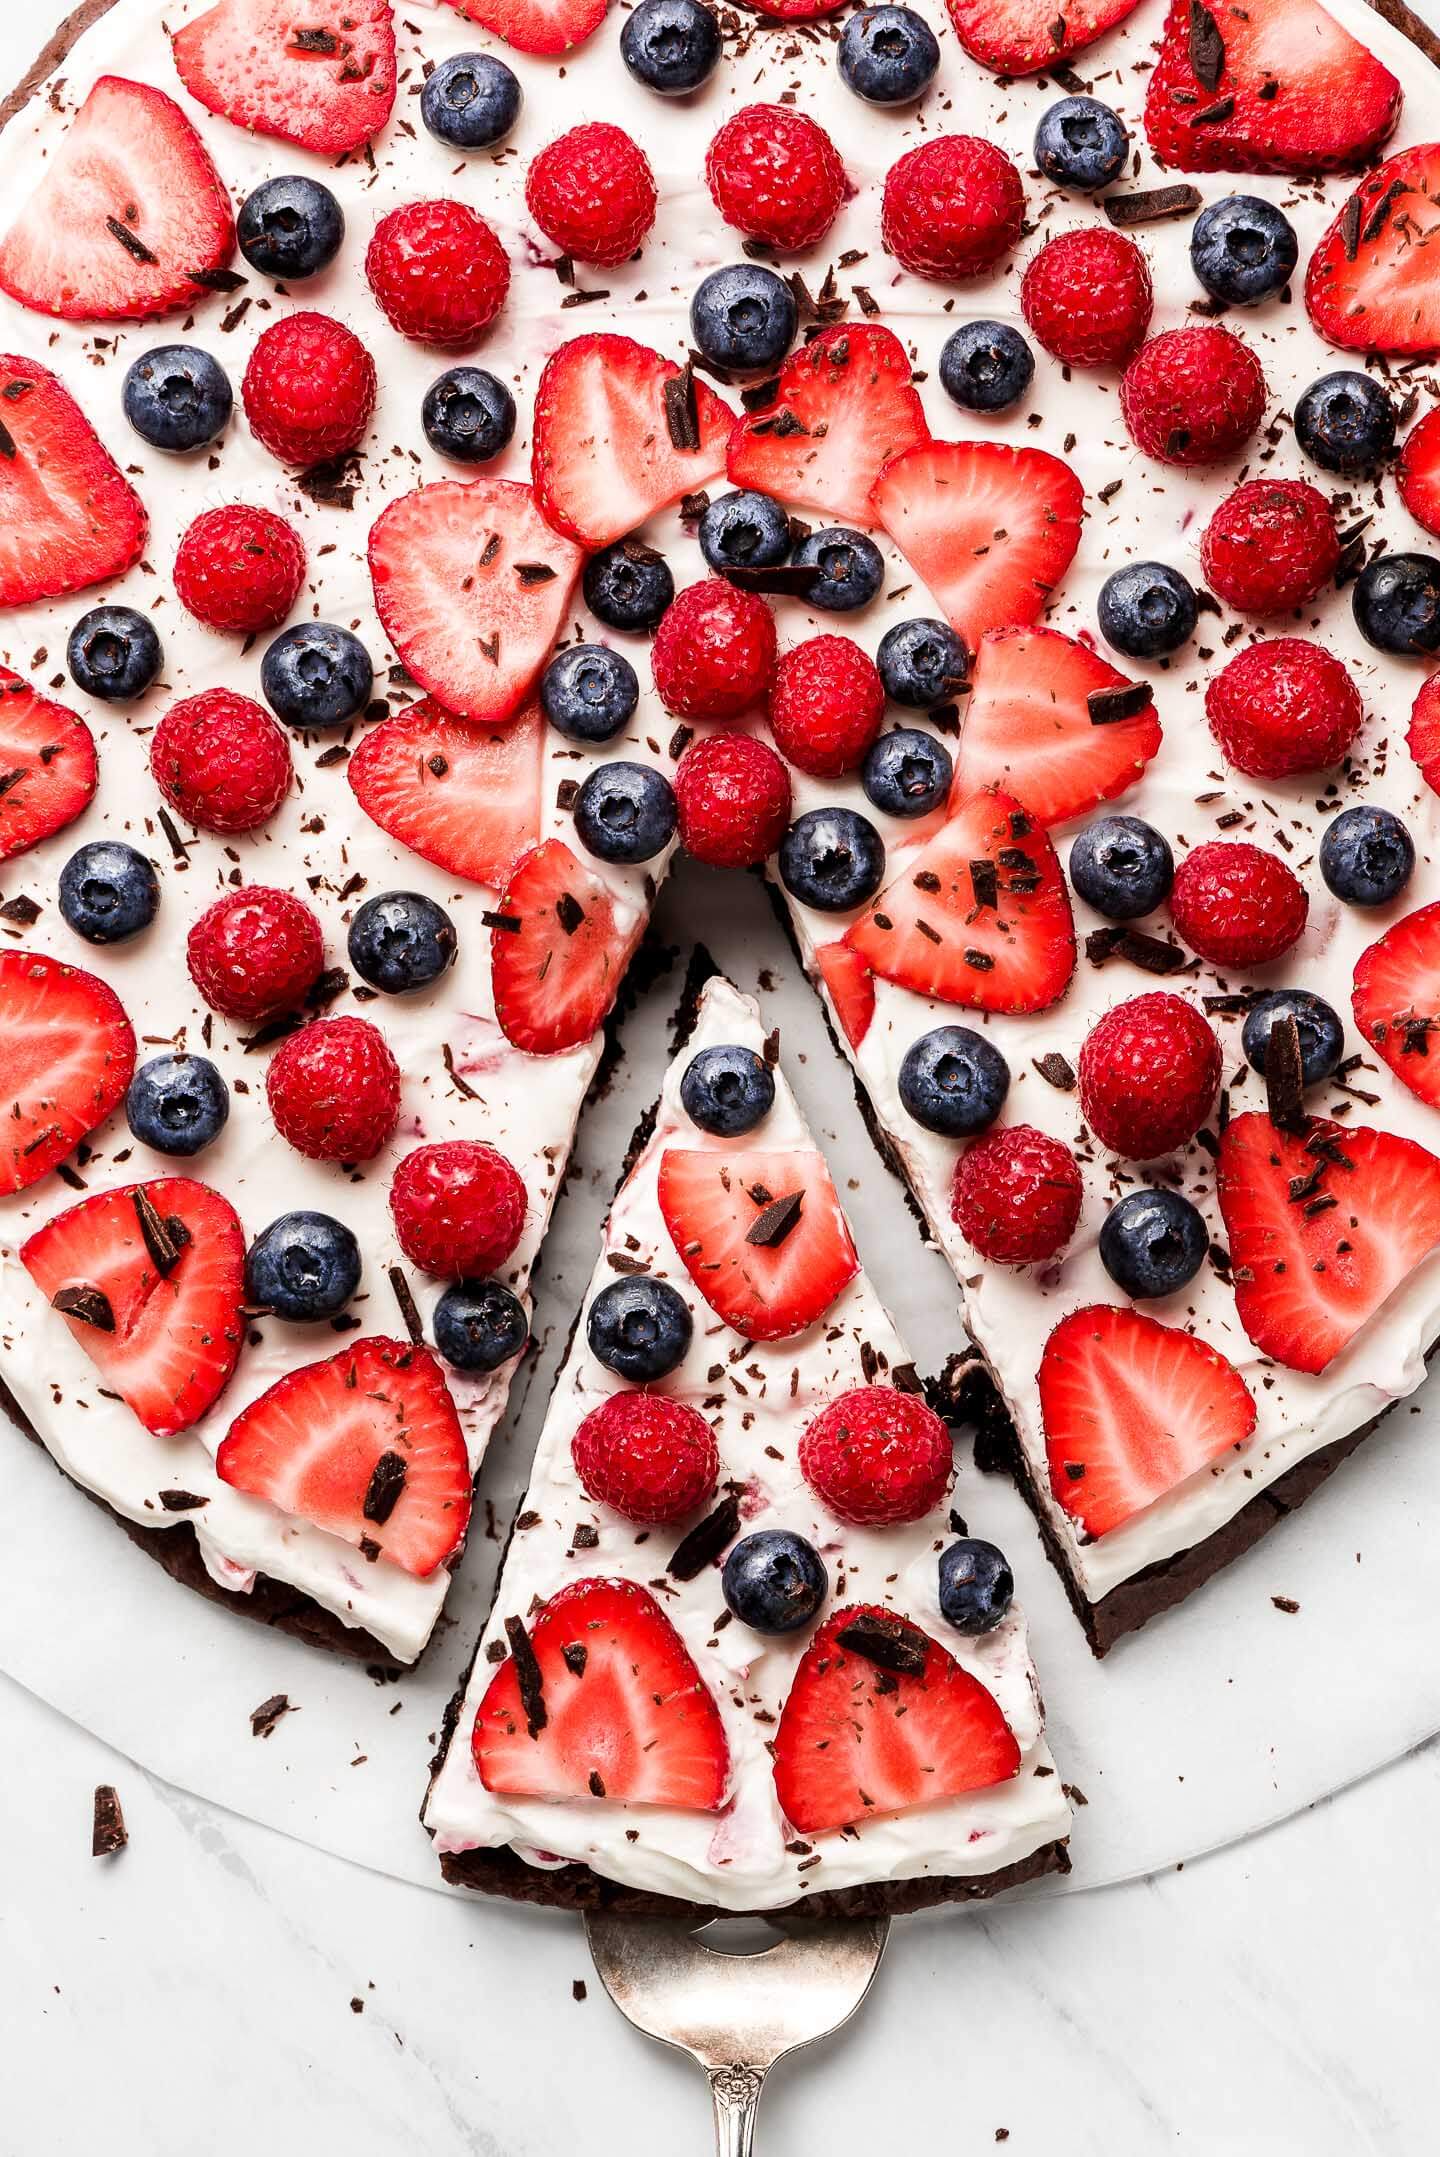 Berry Brownie Pizza decorated with strawberries, raspberries, and blueberries with a slice cut out and being pulled away.